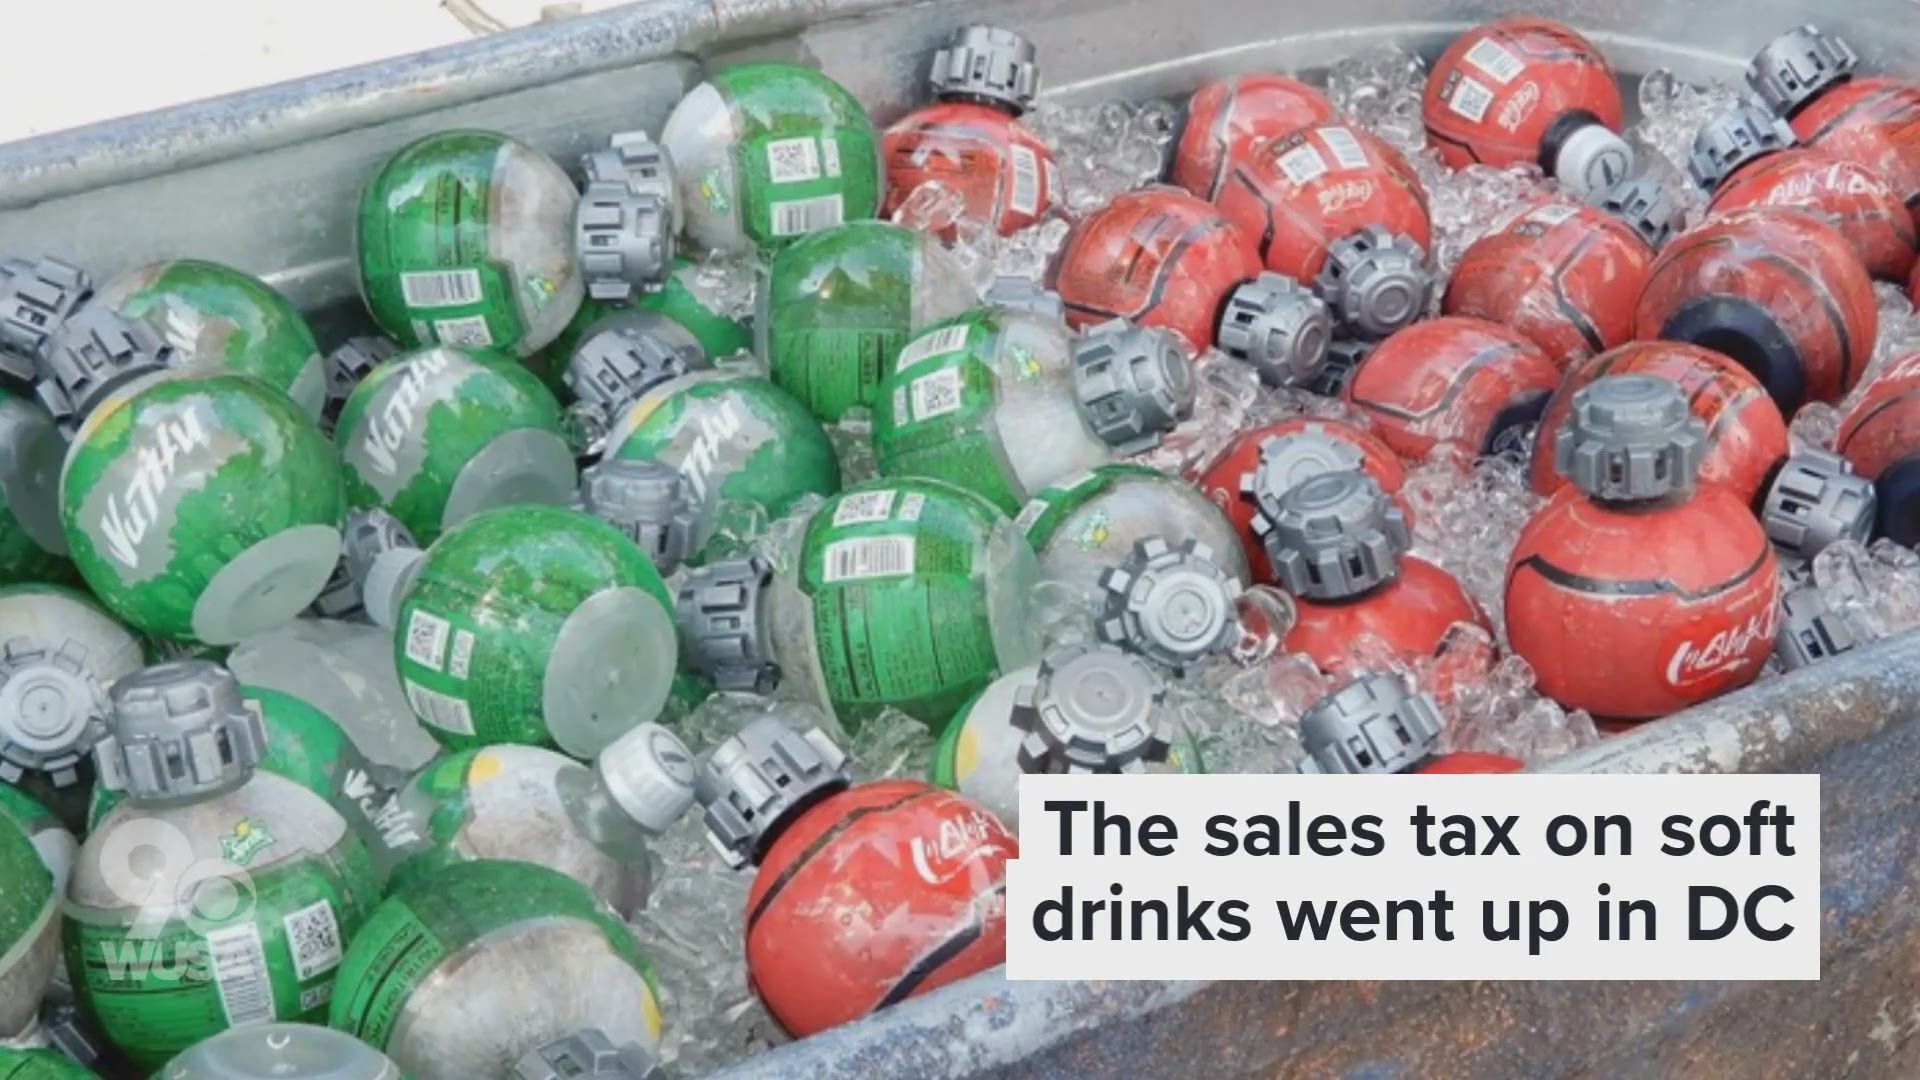 According to the D.C.'s Office of Tax and Revenue website, the sale of or charge for soft drinks are subject to an 8% sales and use tax.